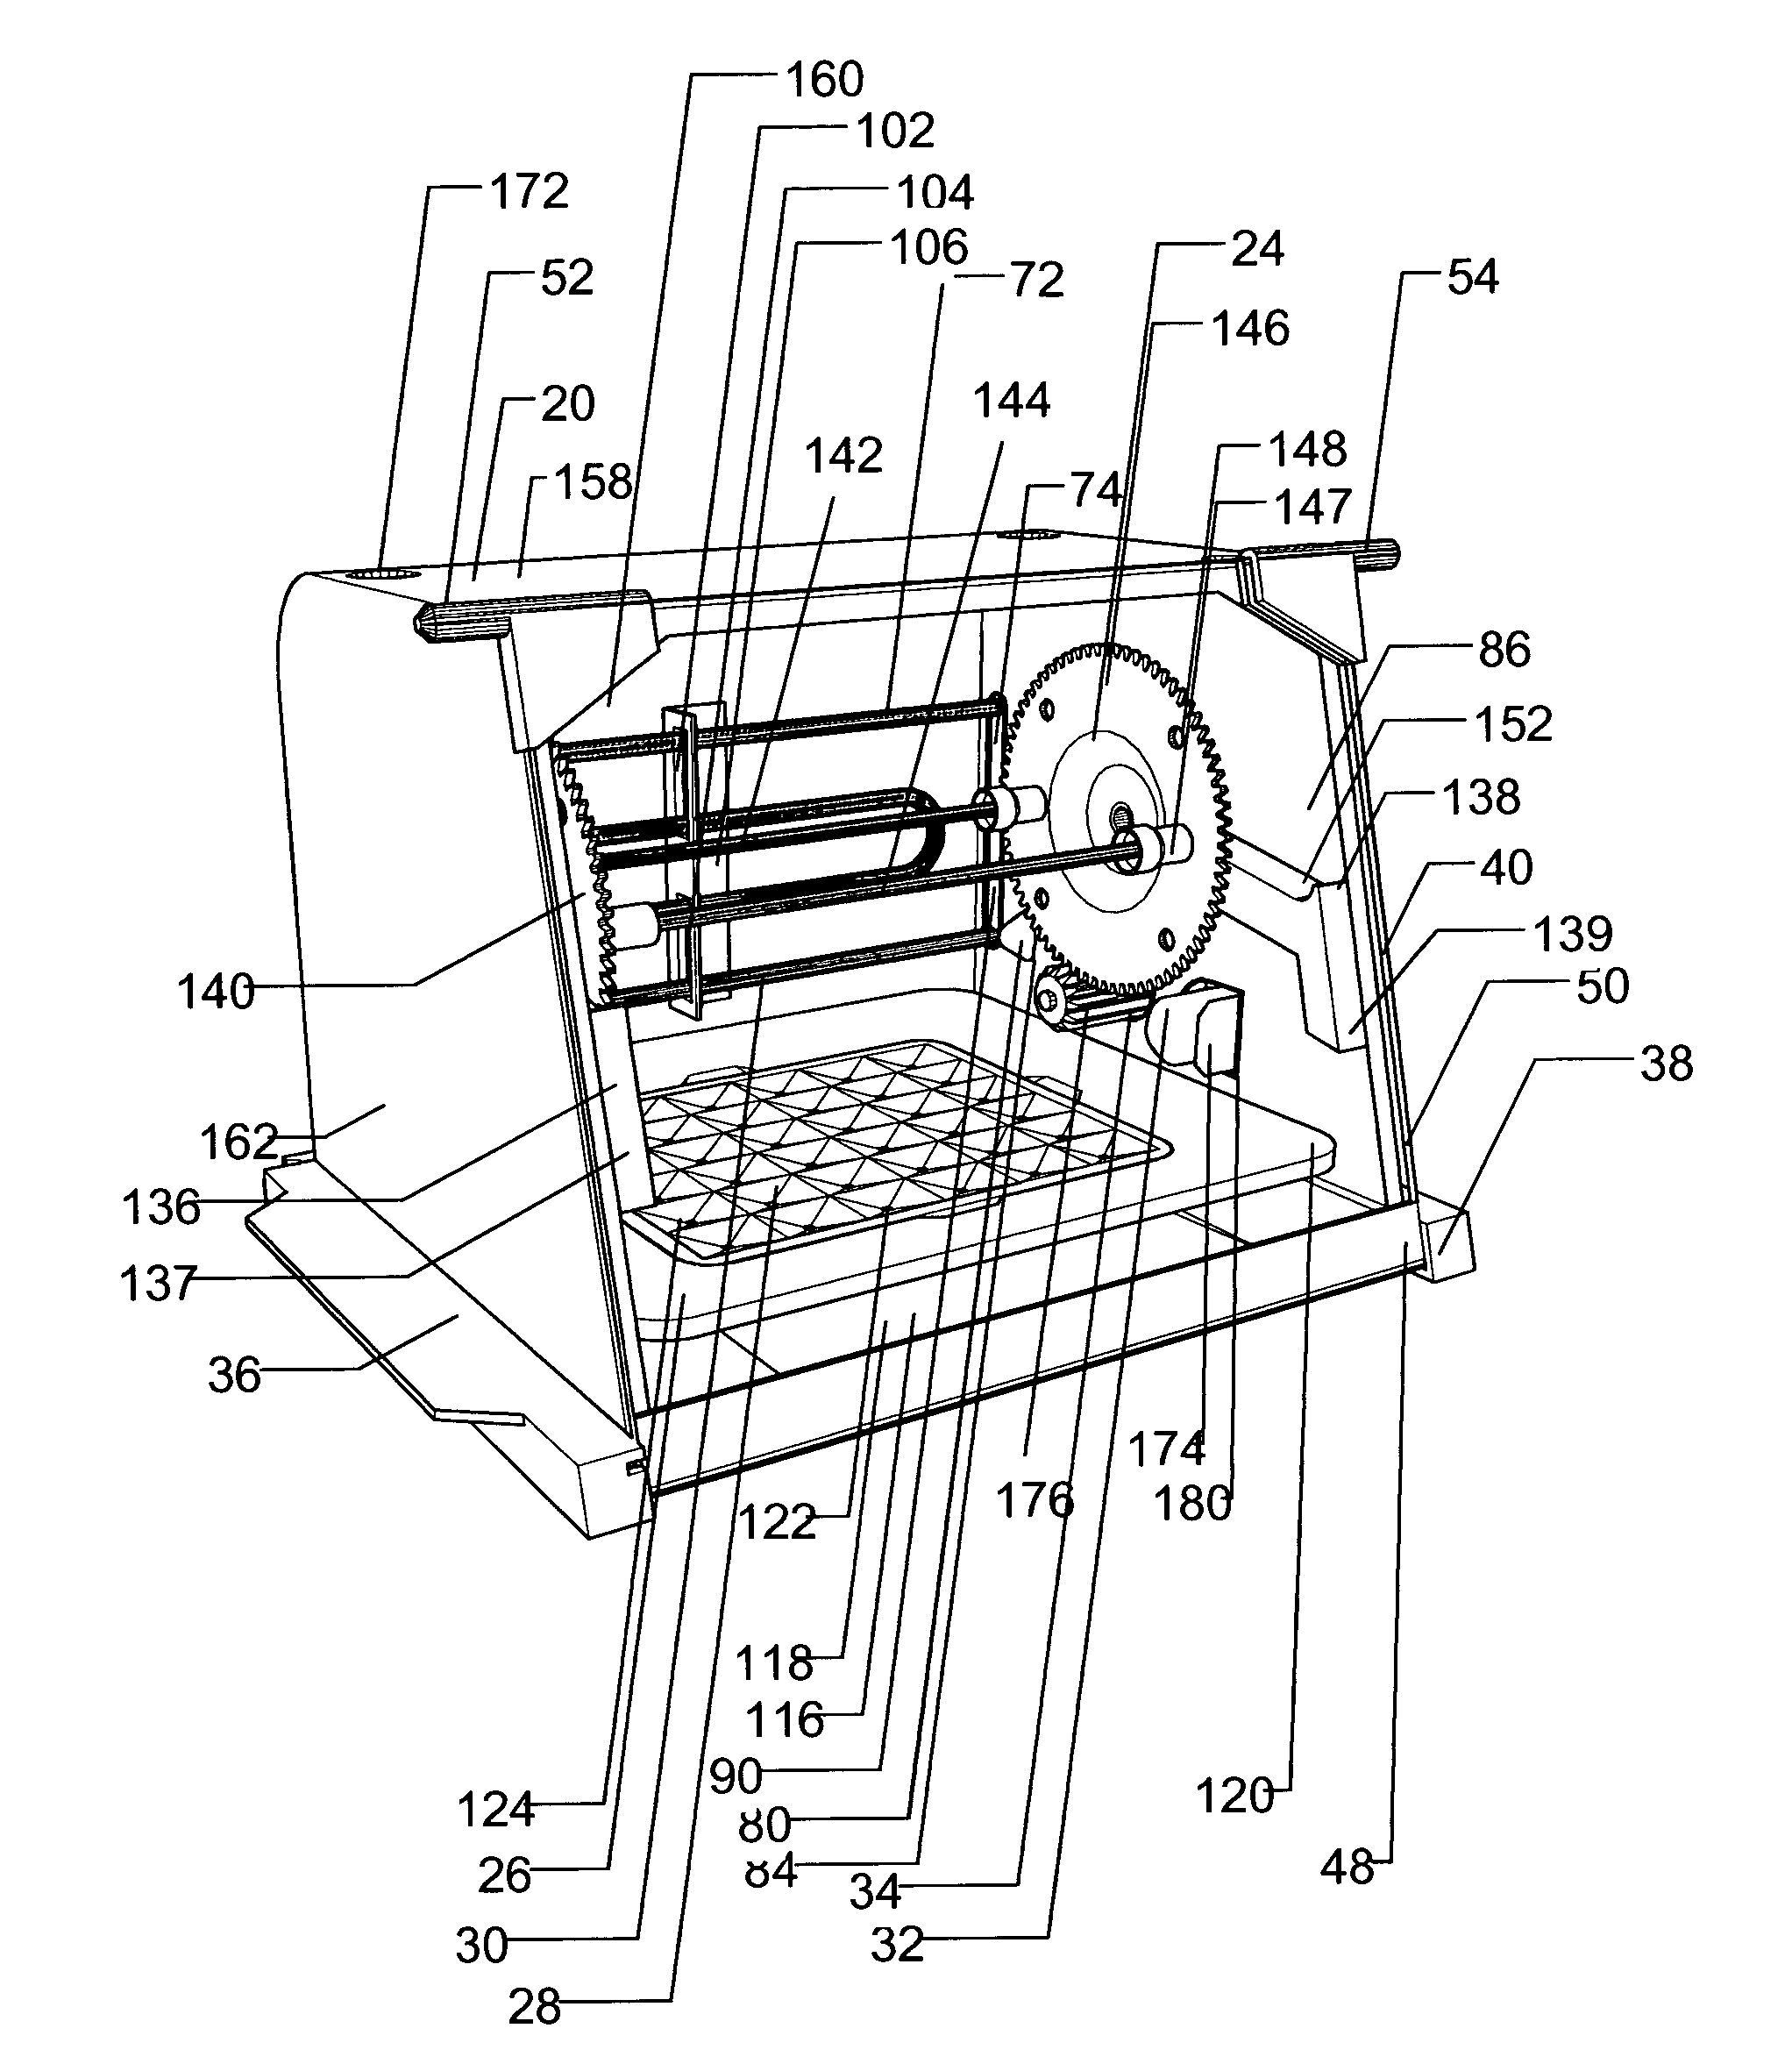 Food cooking apparatus with detachable electronic components